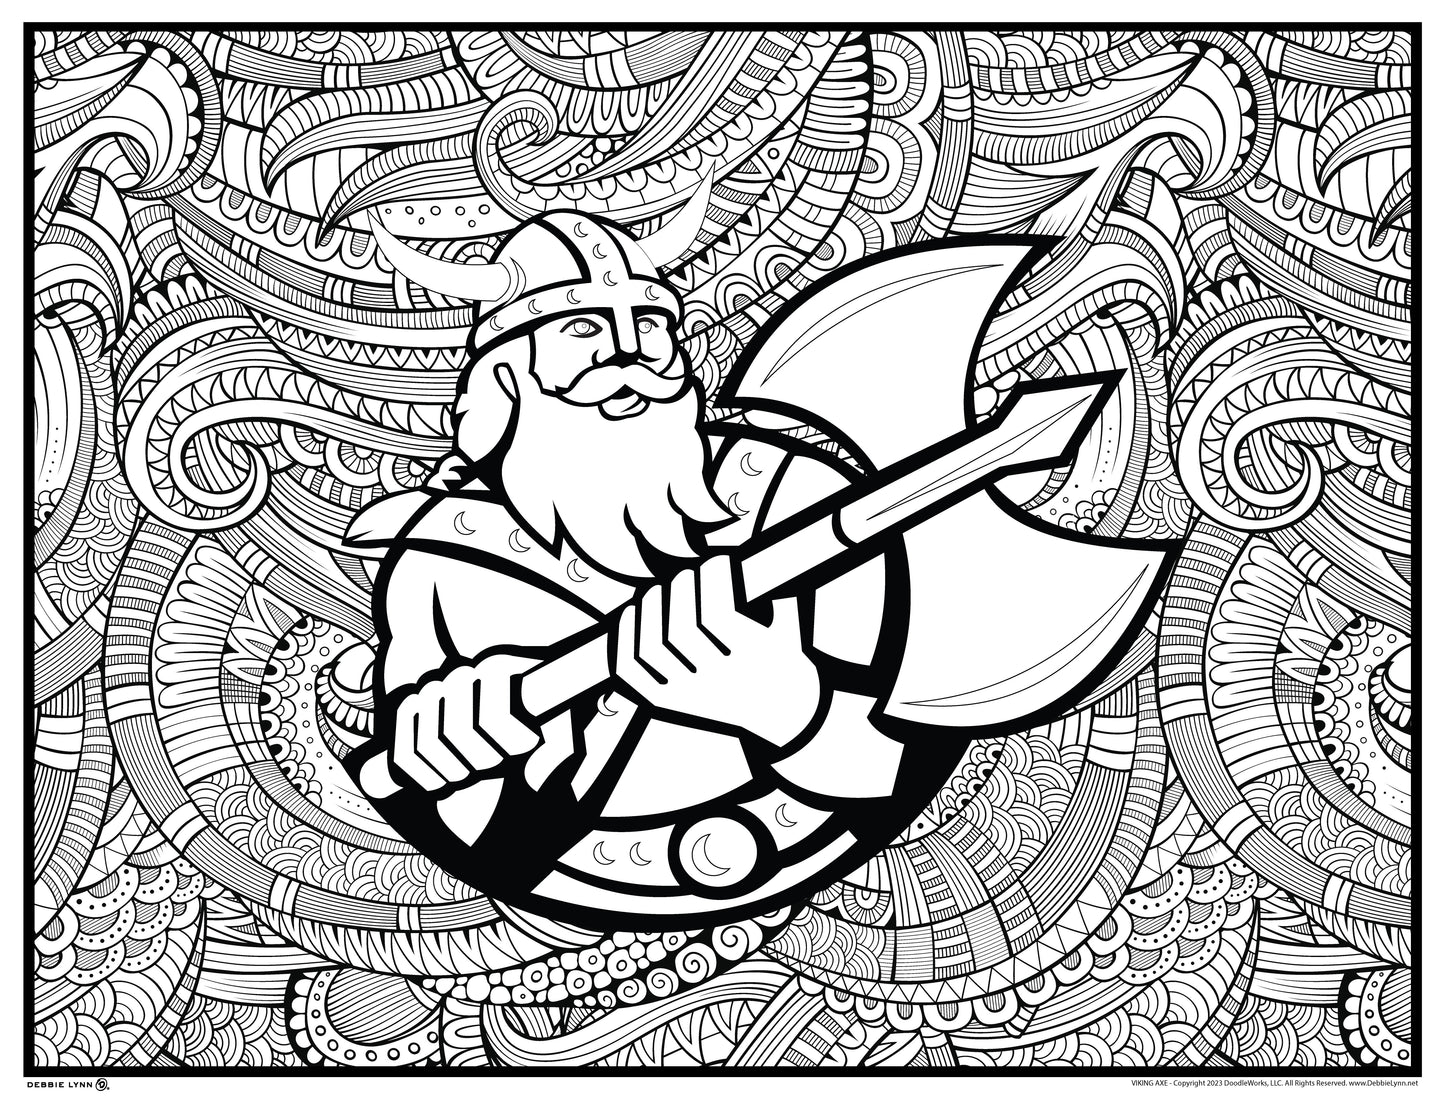 Viking Axe Personalized Giant Coloring Poster 46"x60"